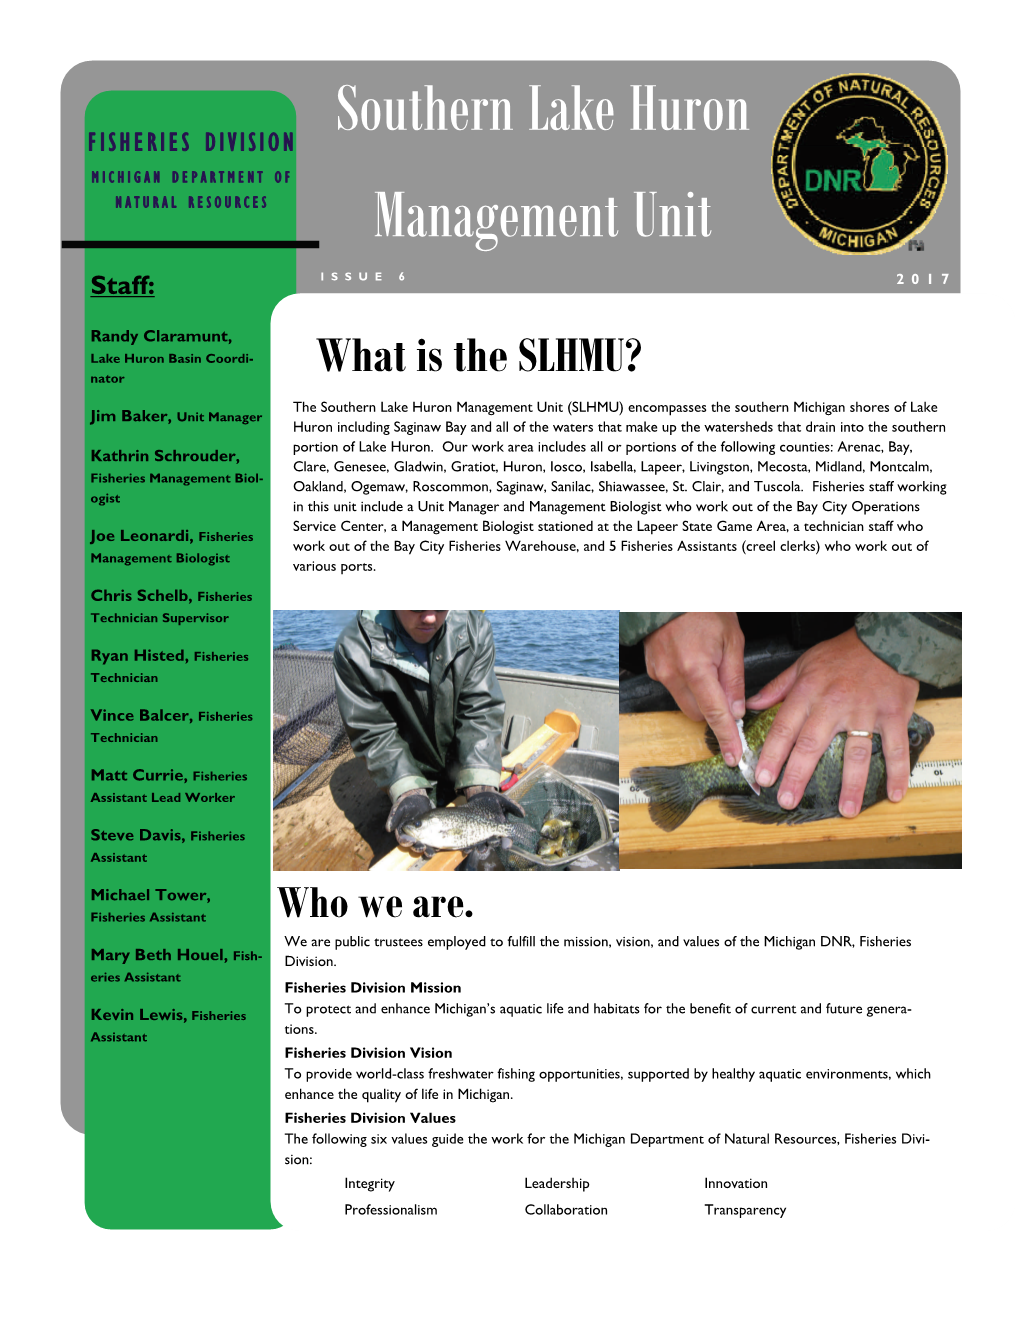 Southern Lake Huron Management Unit Newsletter for 2017